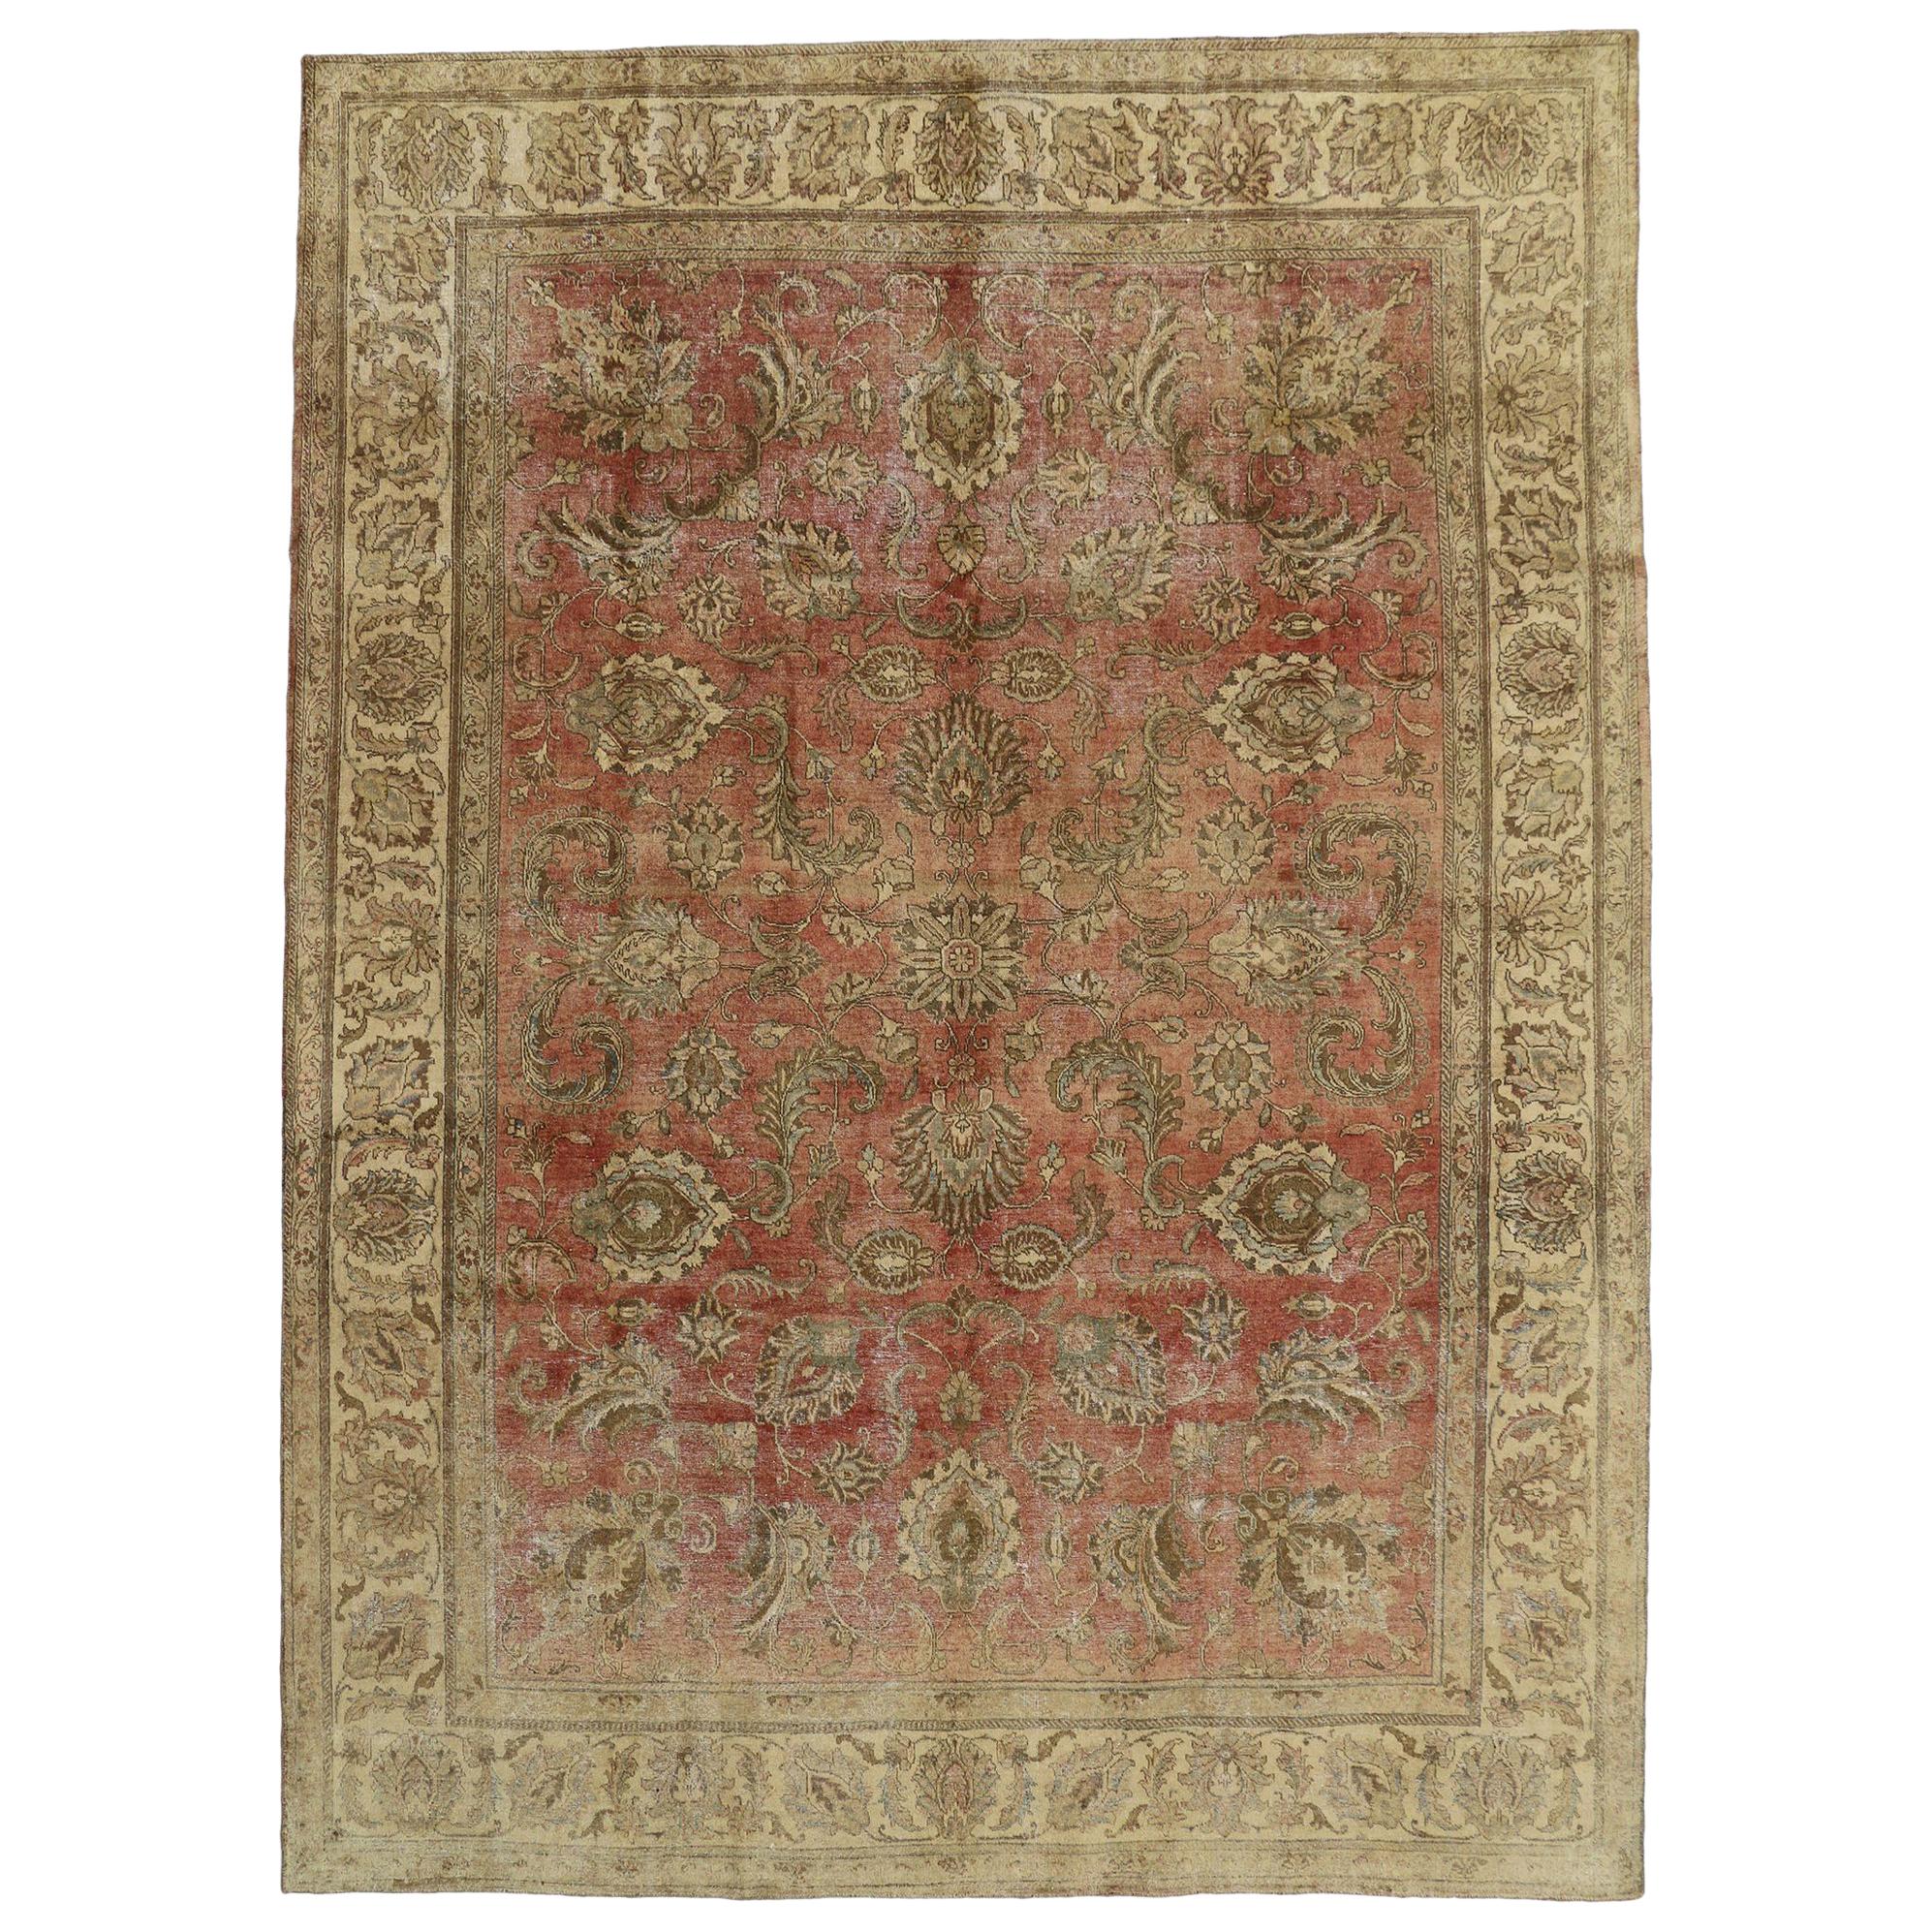 Distressed Vintage Tabriz Persian Rug with Rustic Style